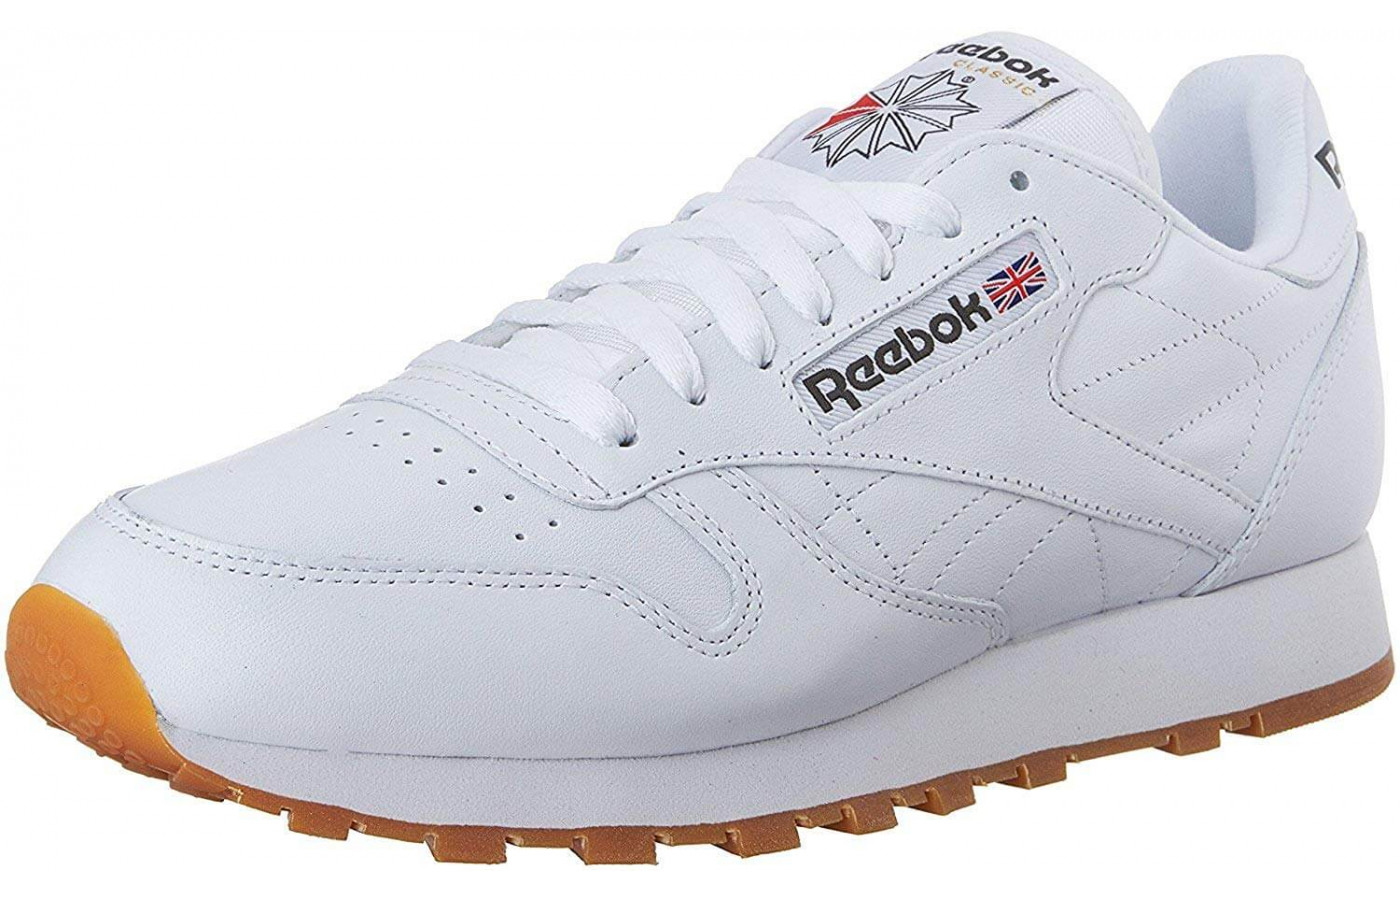 Tigge Ordsprog Accord Reebok Classic Leather Fully Reviewed for Quality | RunnerClick